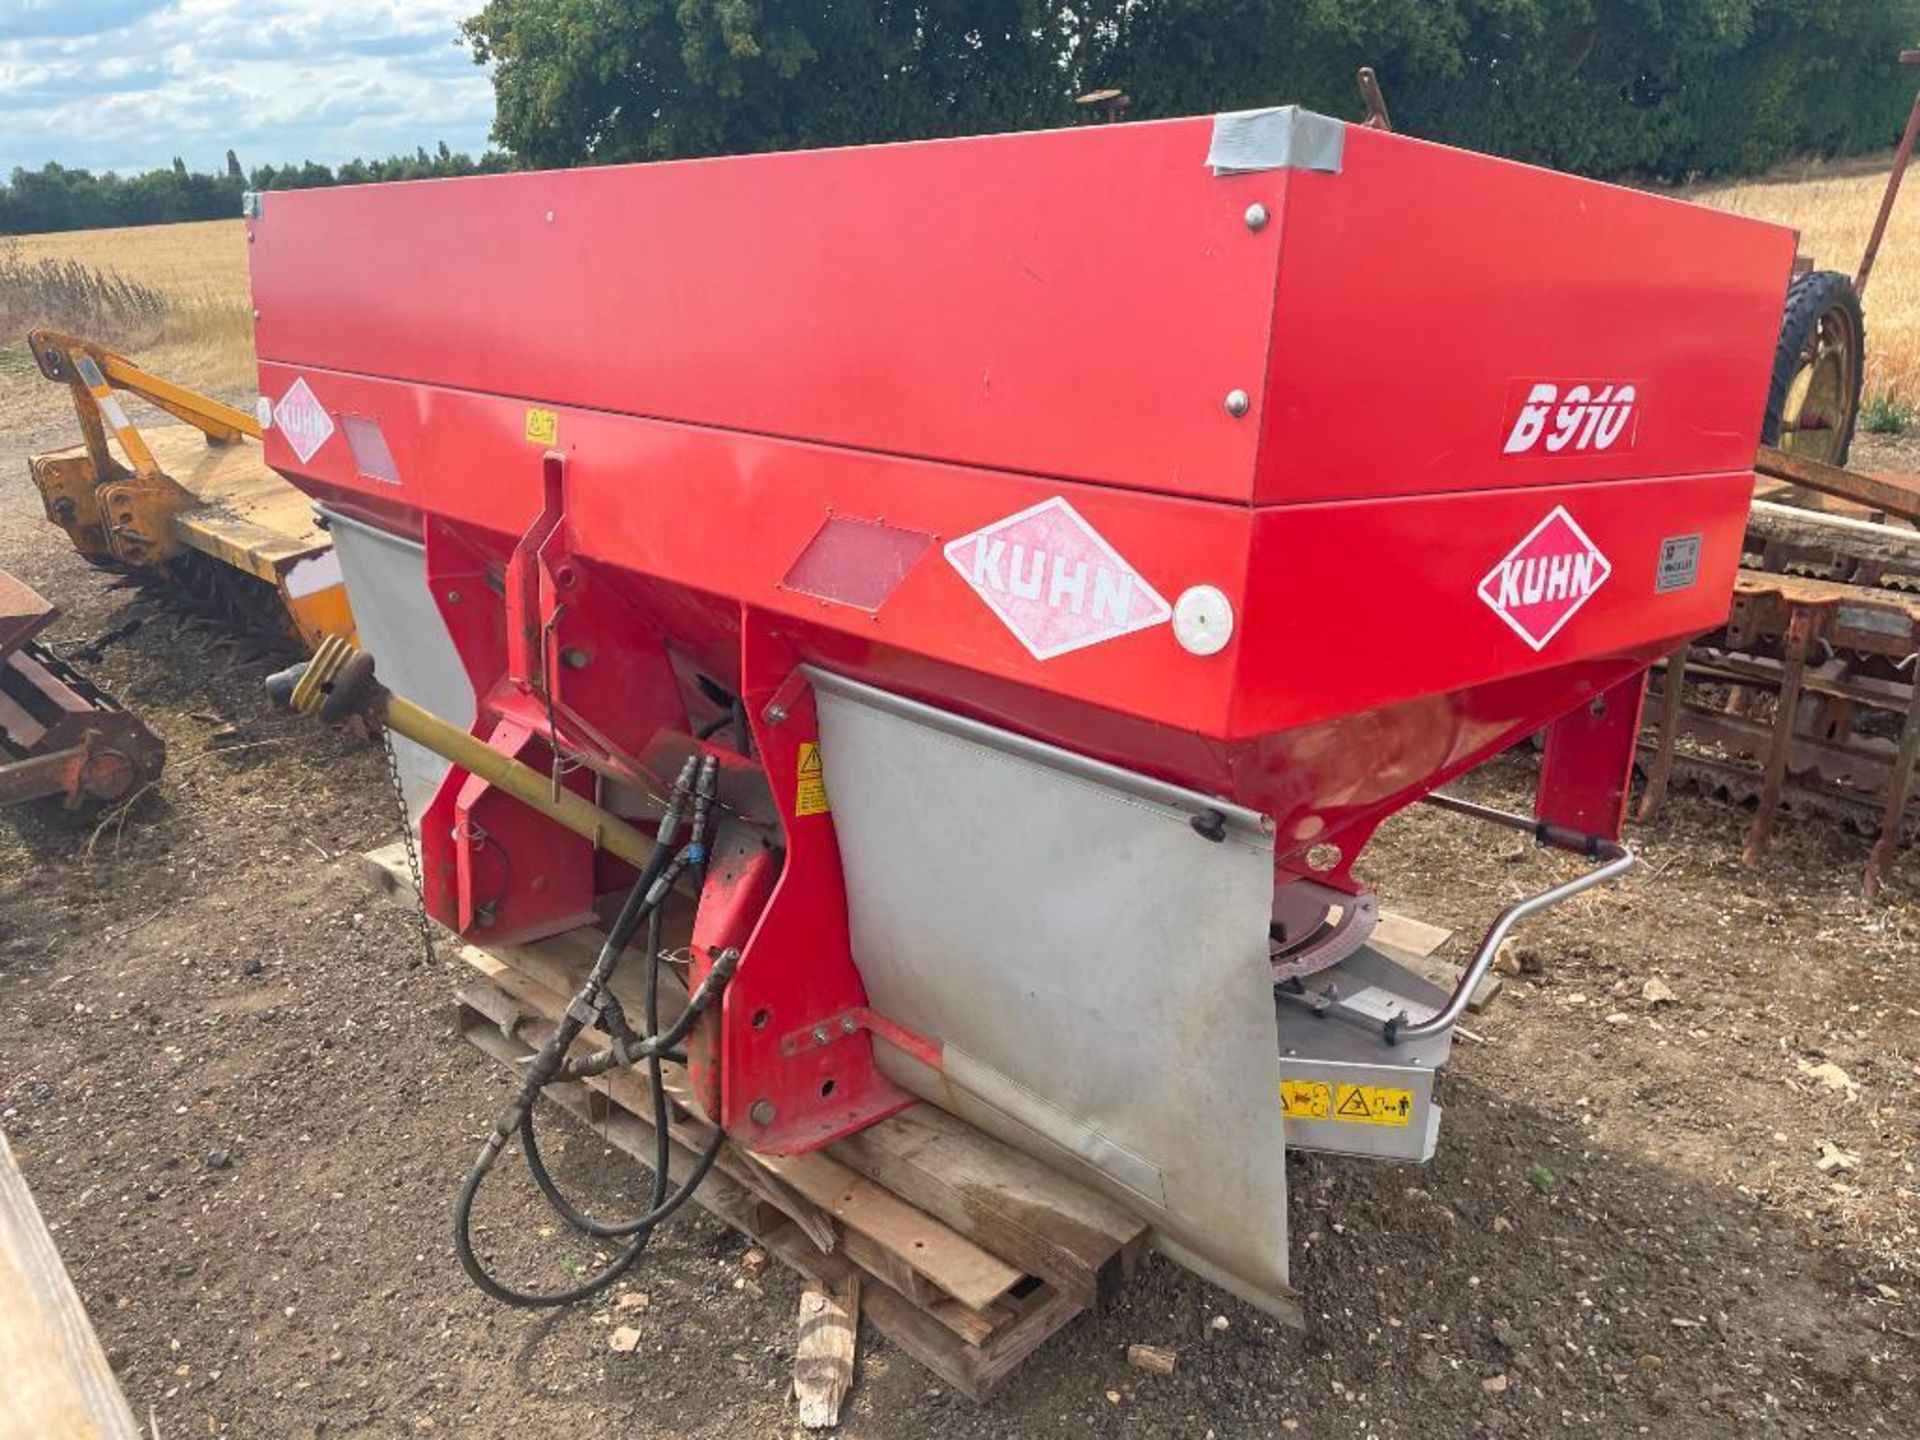 1998 Kuhn MDS1141 12m/18m twin disc fertiliser spreader with B910 hopper extension. Serial No: 6417 - Image 2 of 2